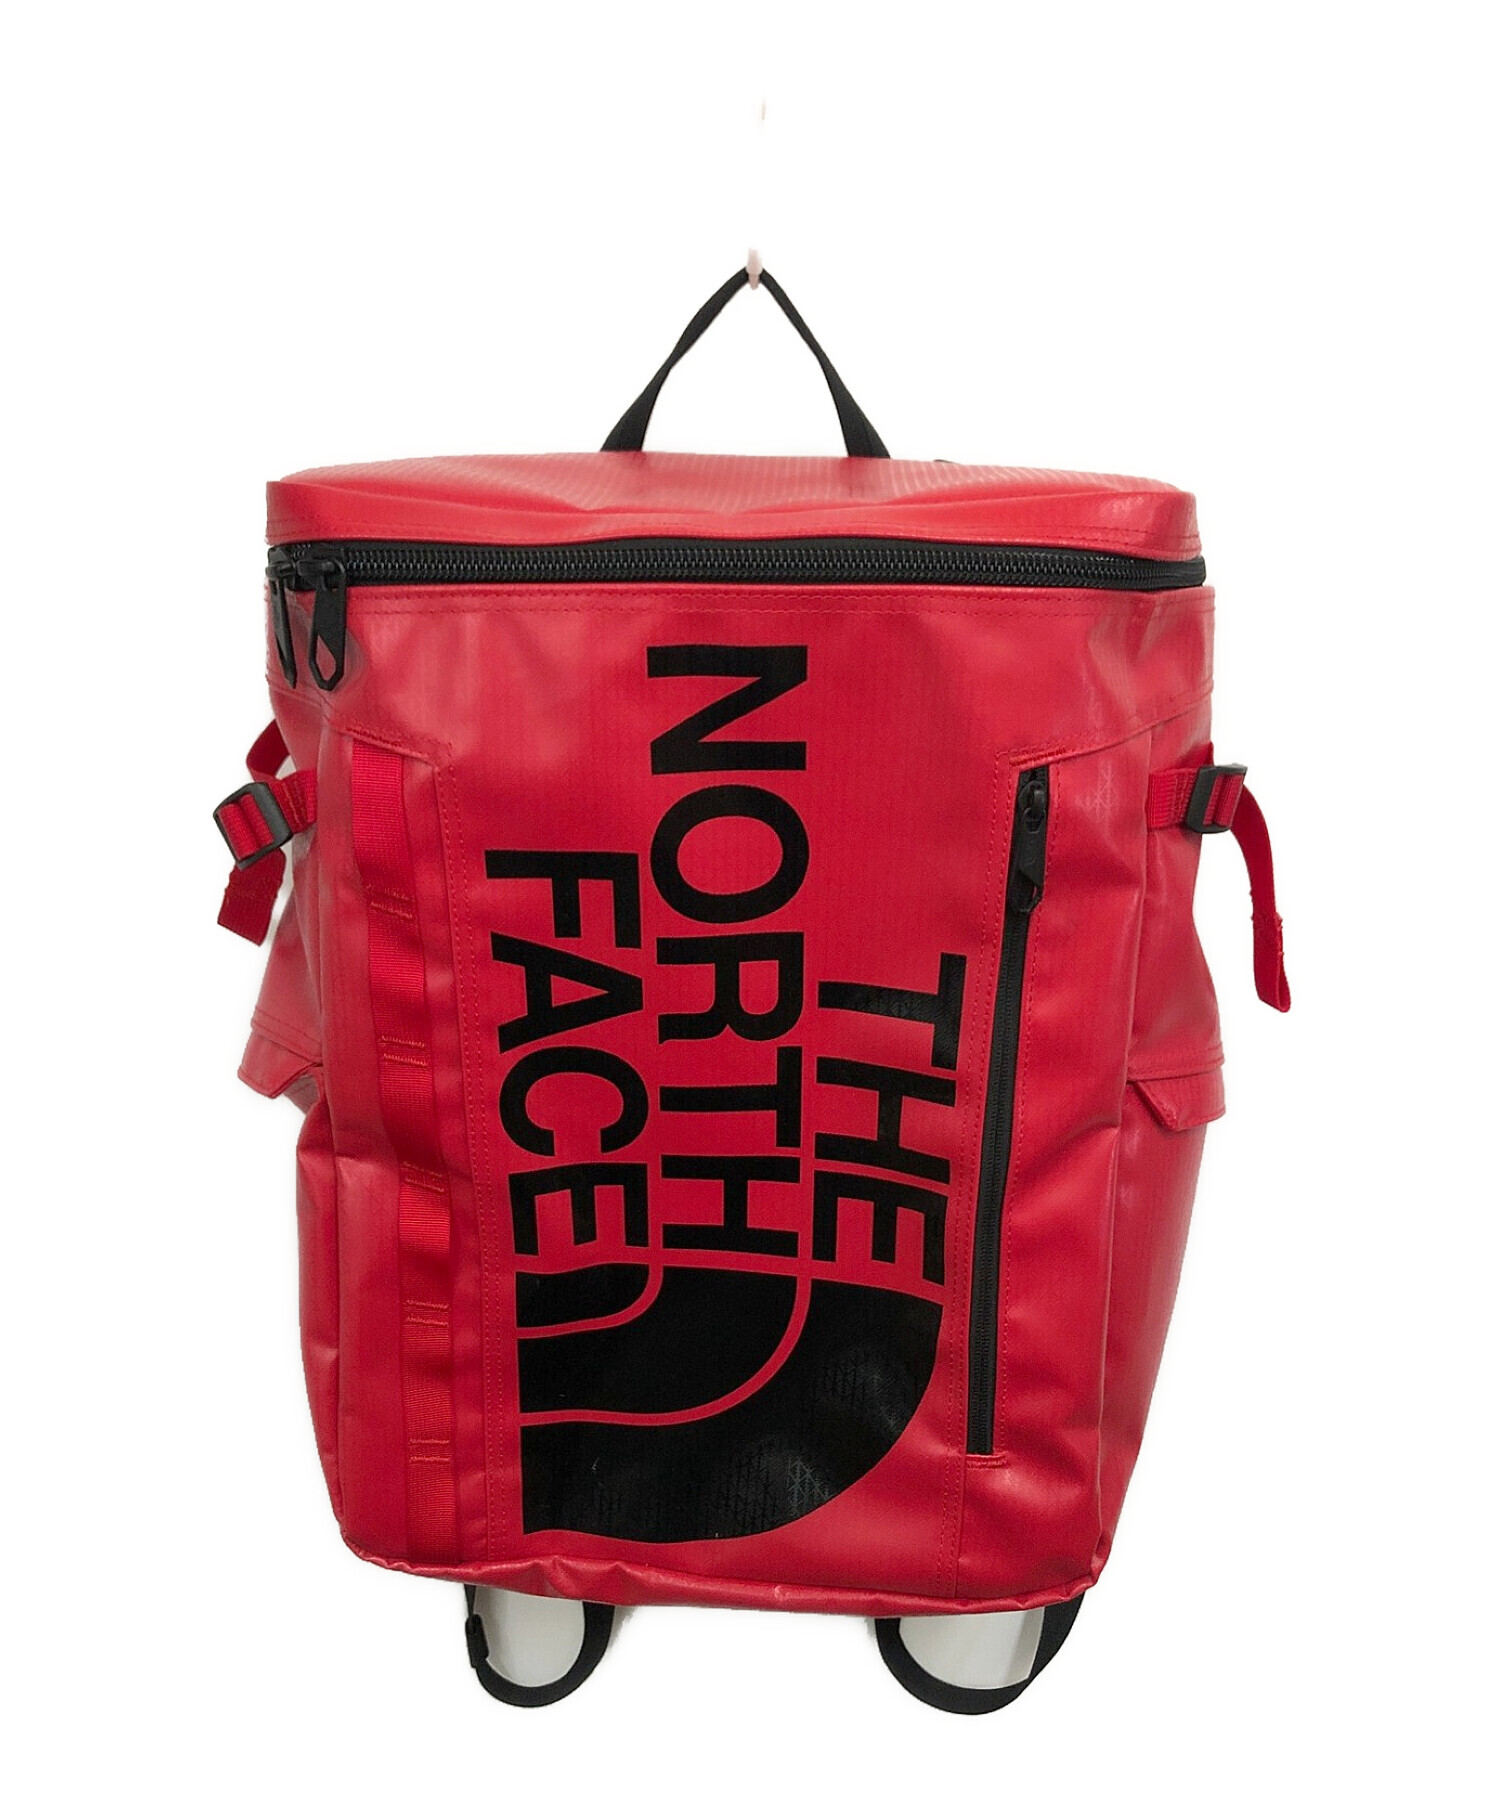 THE NORTH FACE ザノースフェイス リュック　赤　レッド　バッグ